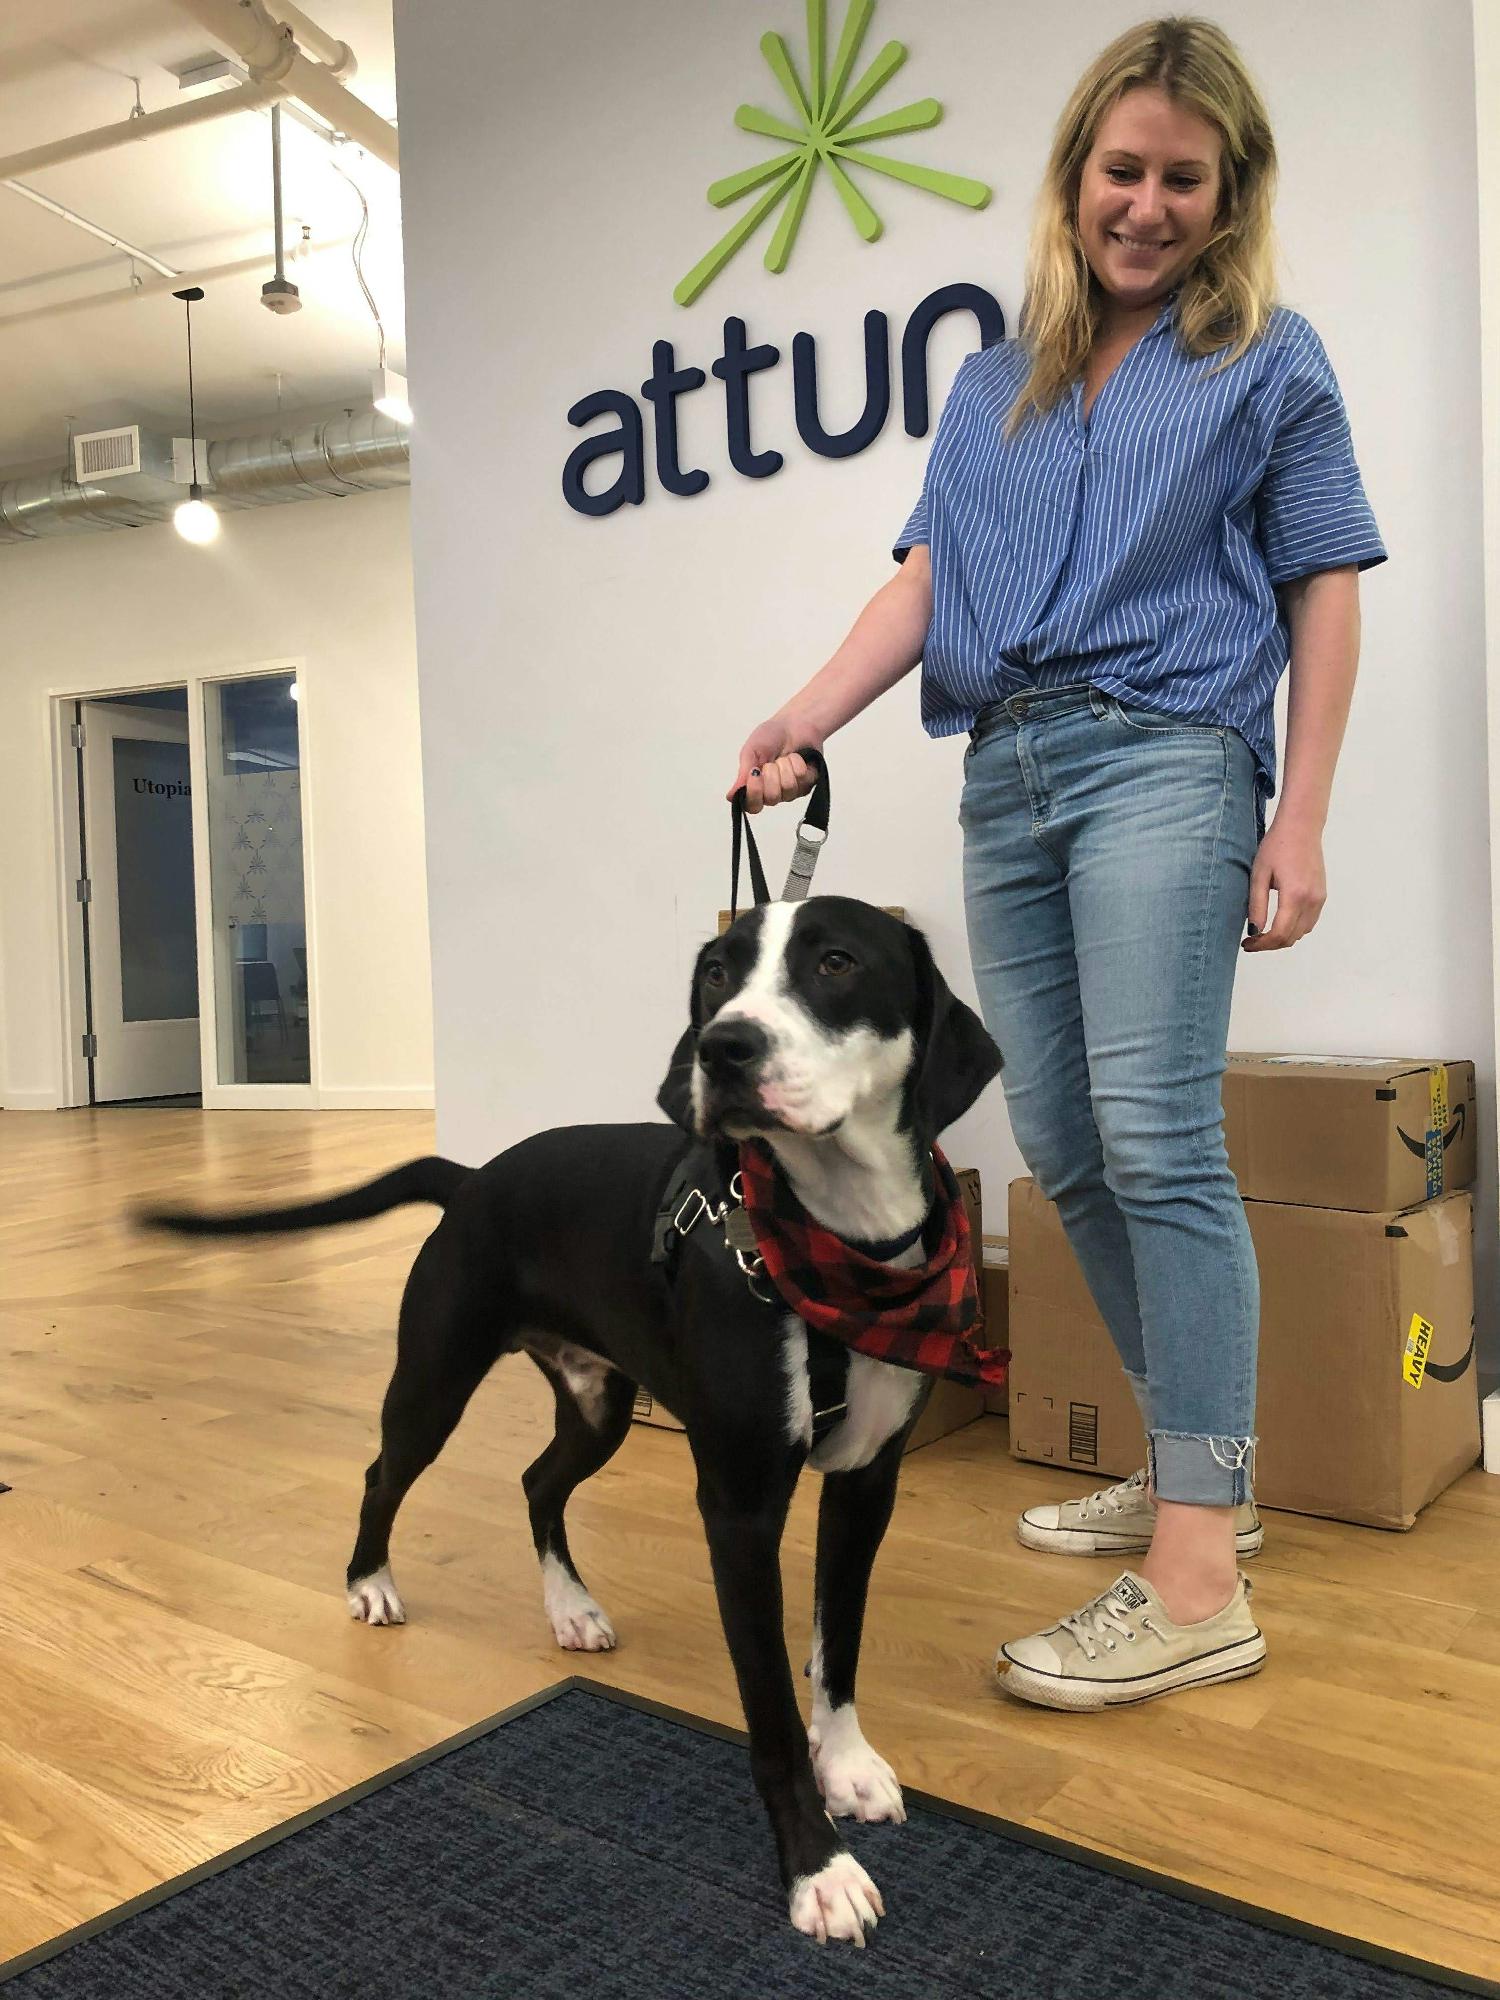 WE LOVE OUR PETS HERE AT ATTUNE! HERE IS OUR CHIEF TREAT OFFICER NOTCH MAKING HIS ROUNDS!